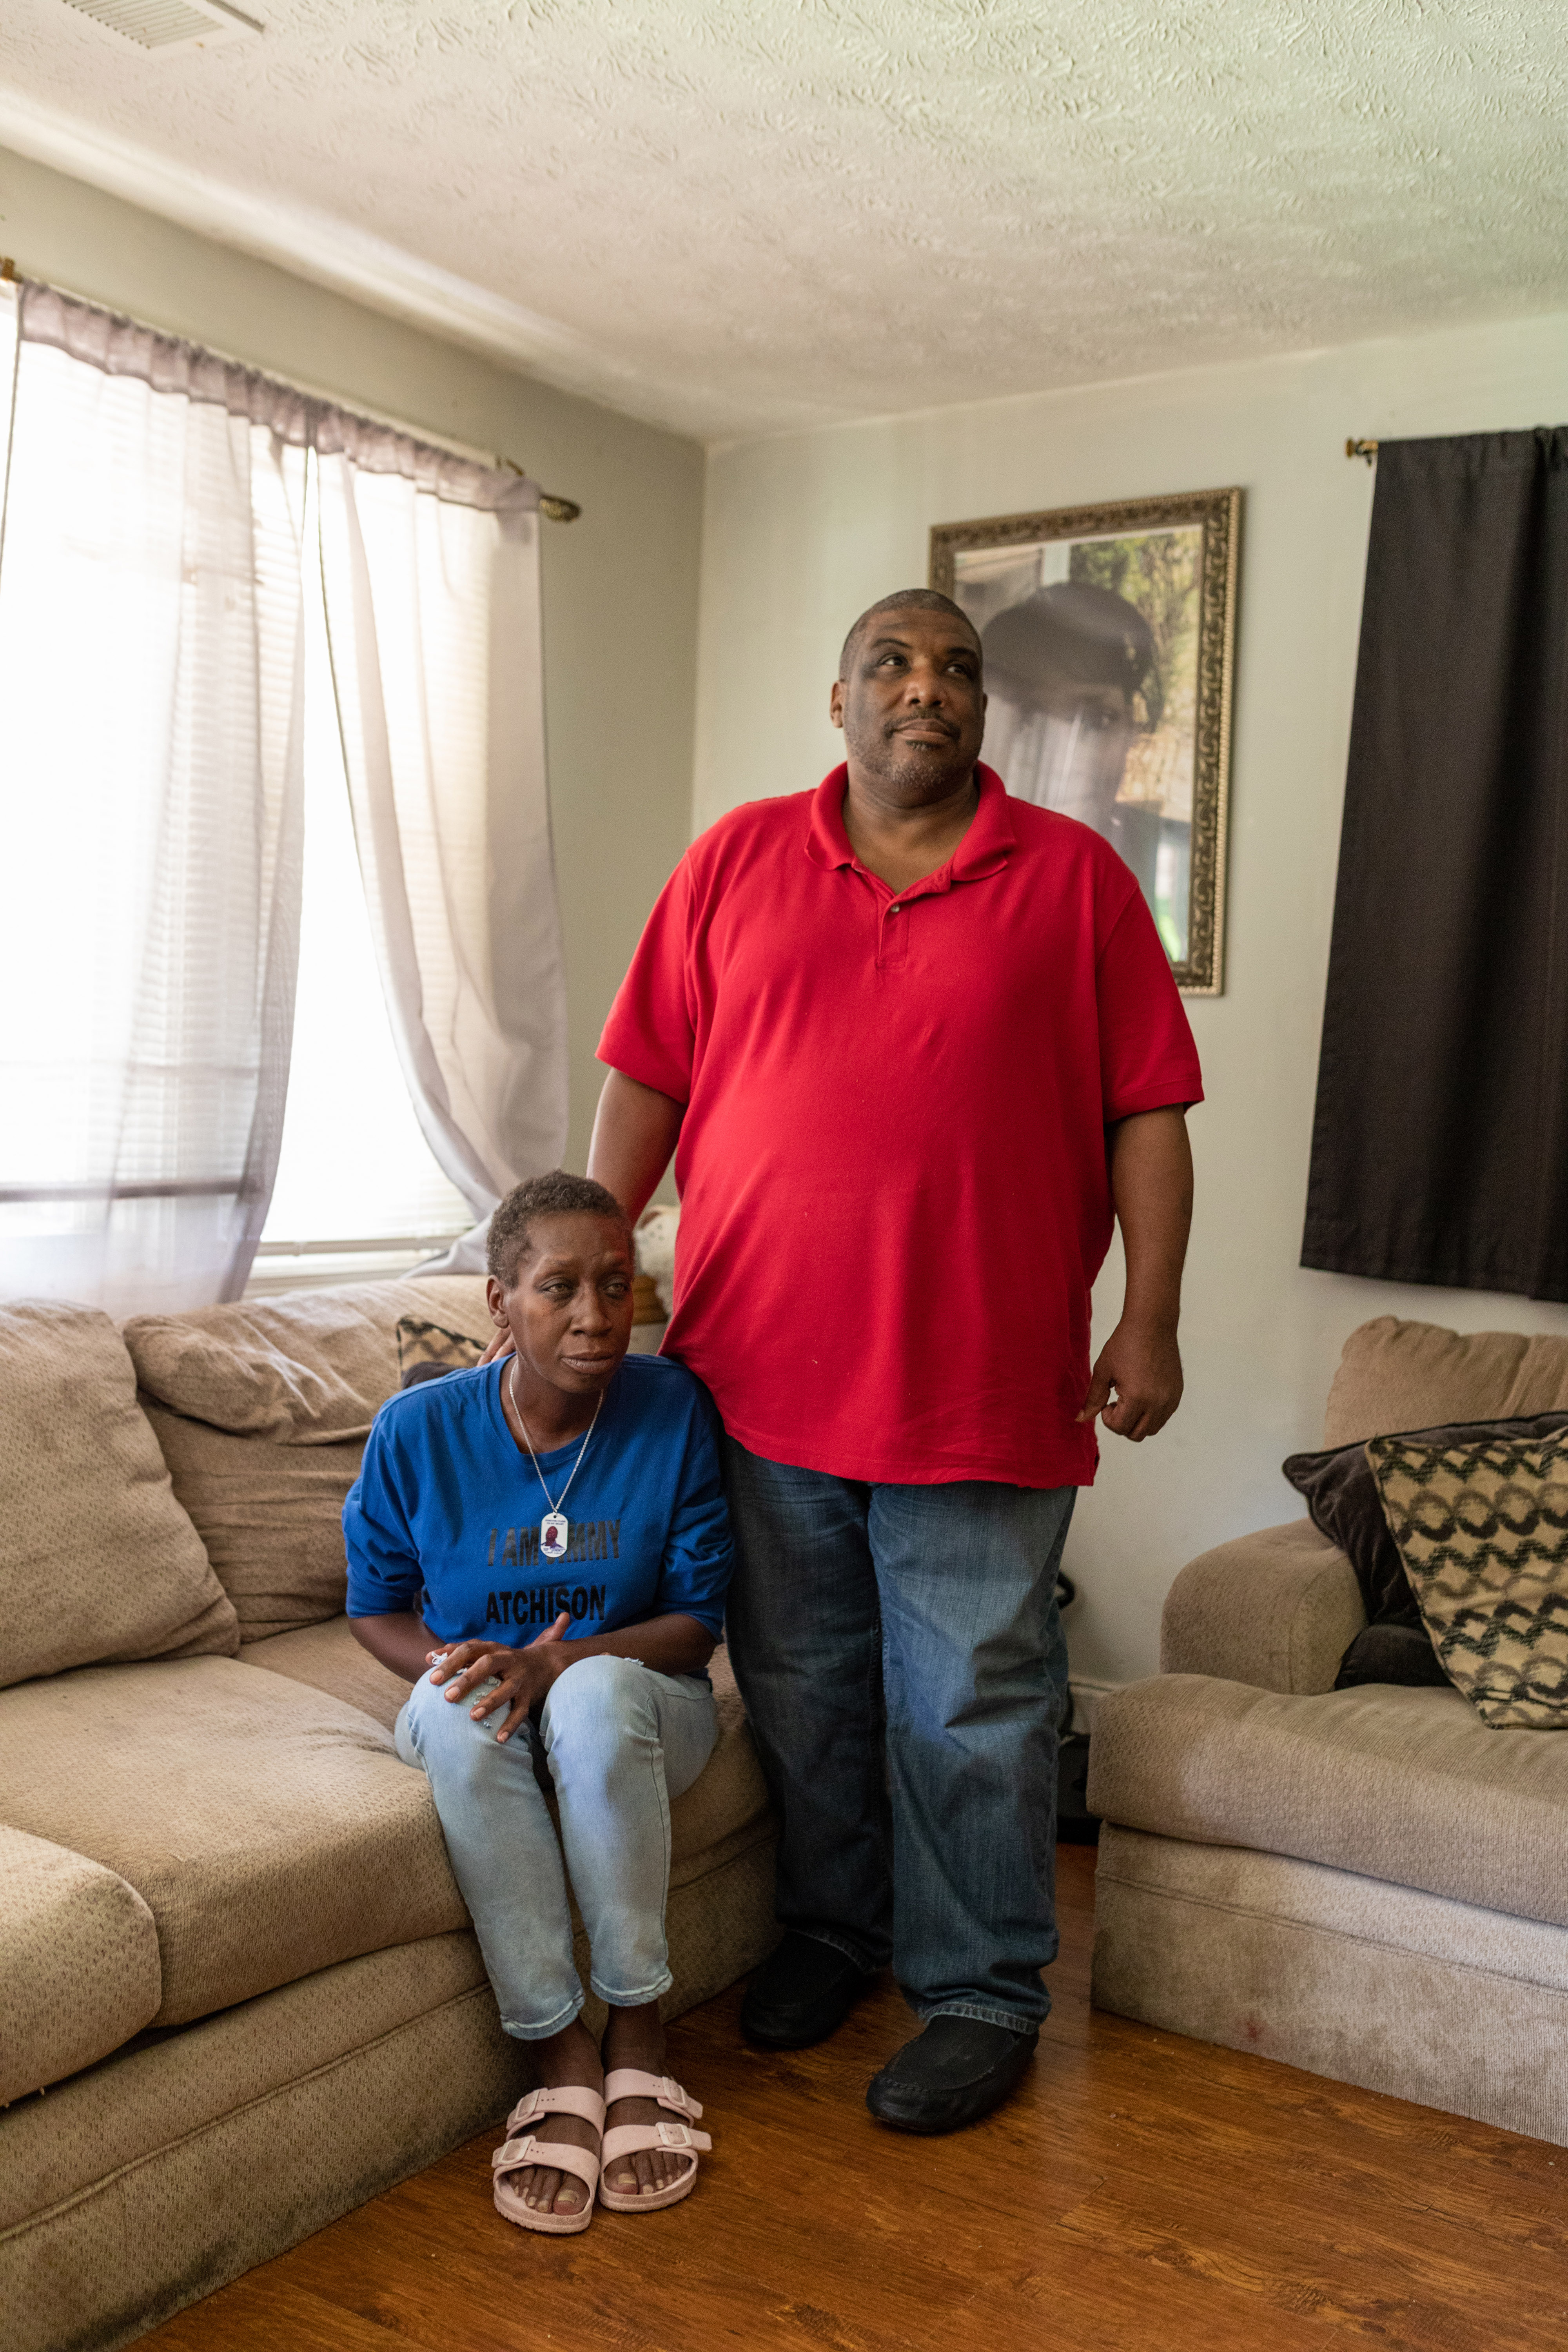 Cynthia Atchison and Jimmy Hill, mother and father of Jimmy Atchison, who was unarmed and hiding in a closet when he was killed by an Atlanta police officer who was part of the FBI’s Atlanta Metro Major Offender task force